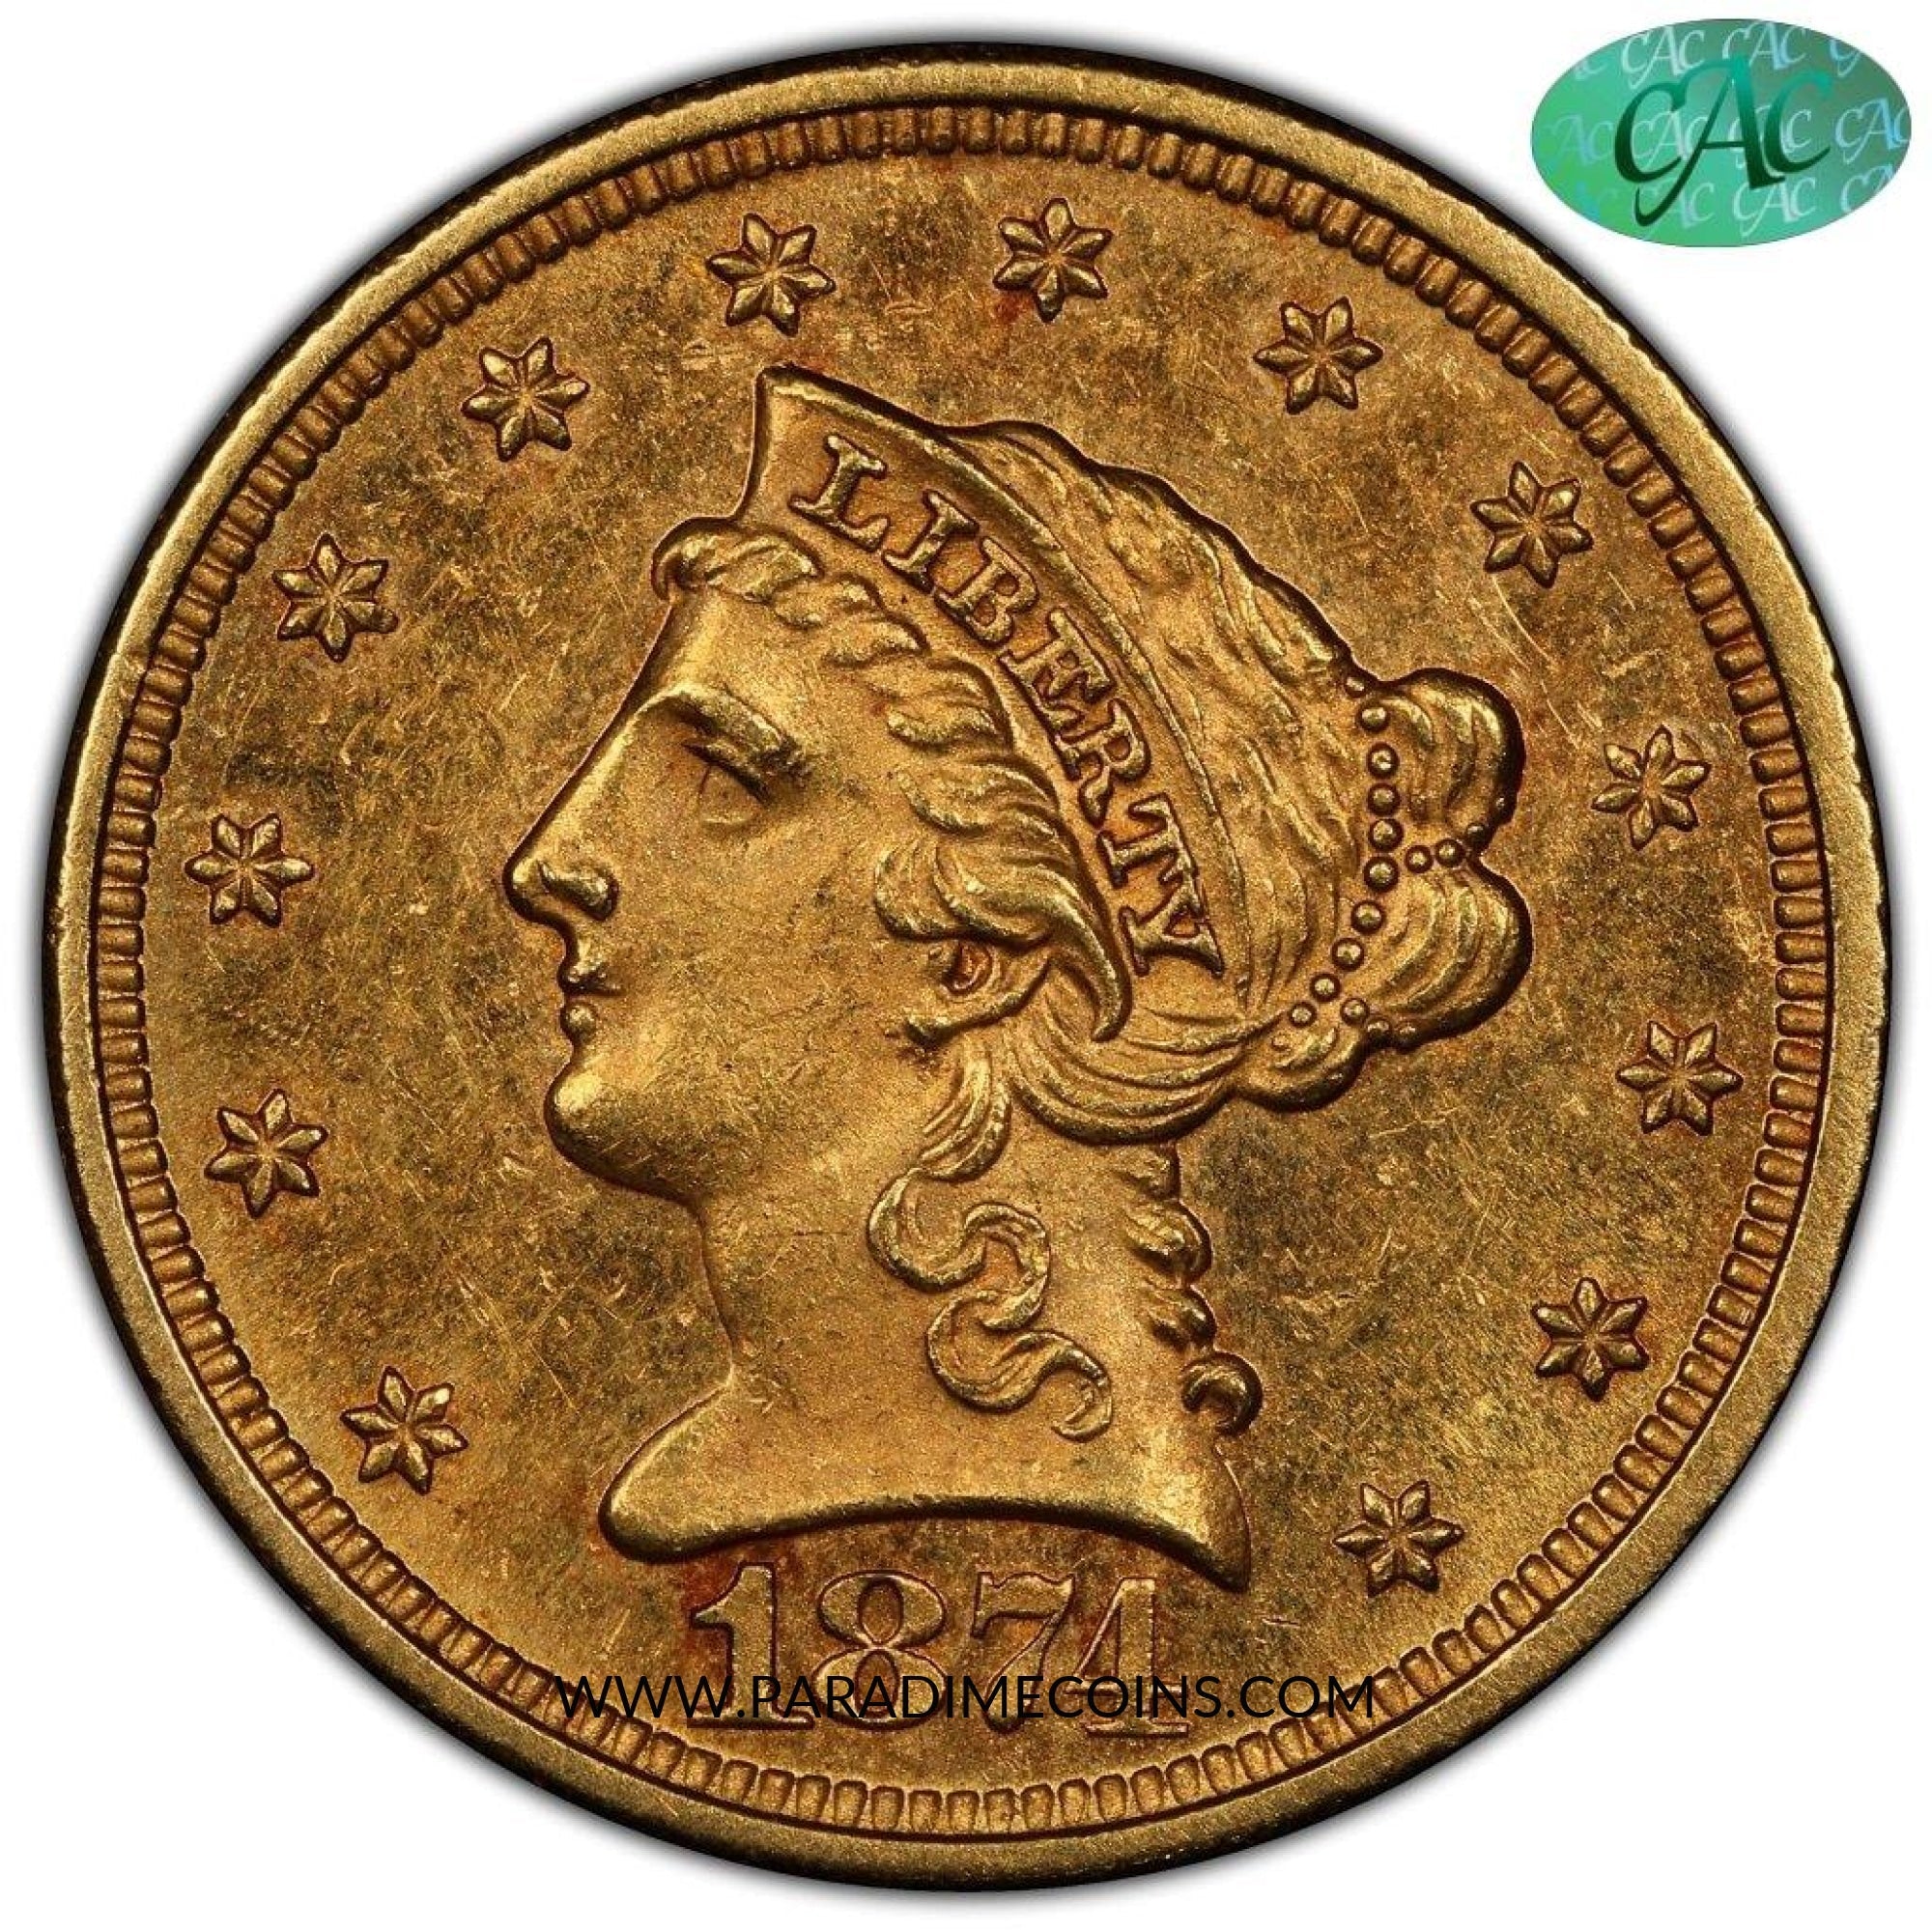 1874 $2.5 MS62 PCGS CAC - Paradime Coins | PCGS NGC CACG CAC Rare US Numismatic Coins For Sale